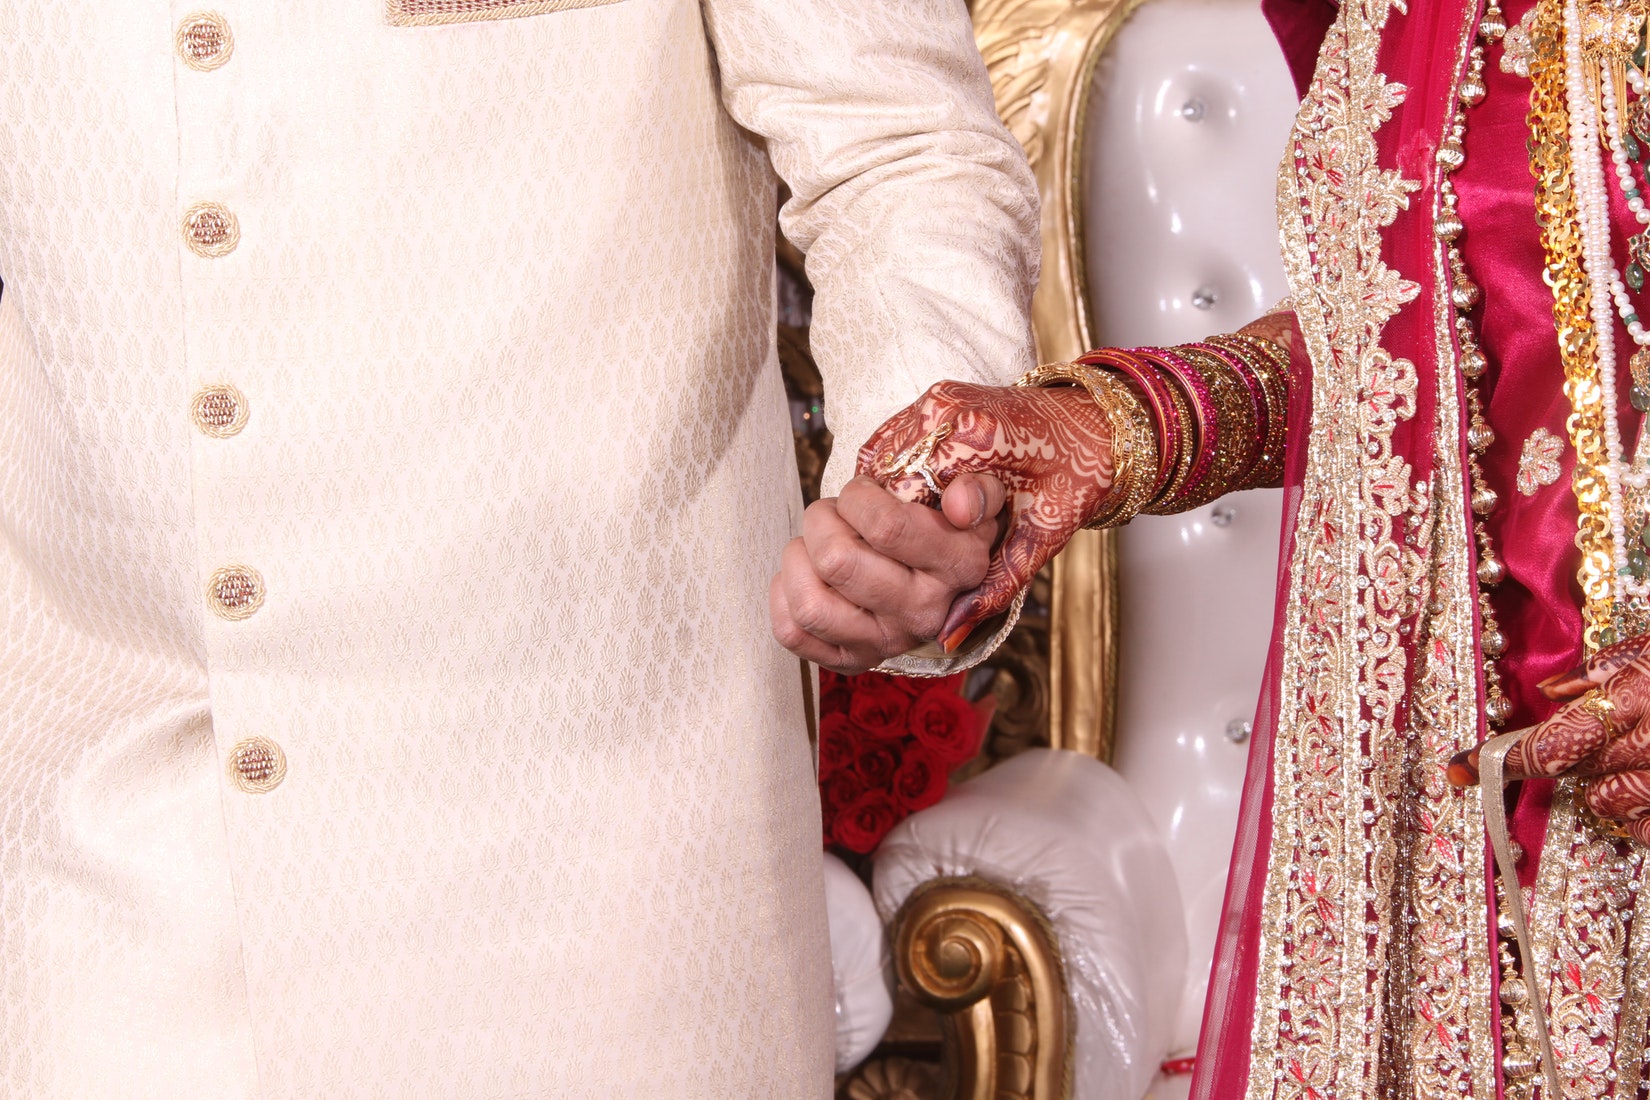 ENTITY reviews the stunning story of "Connecting Threads: Unleashing India." Photo of couple holding hands.